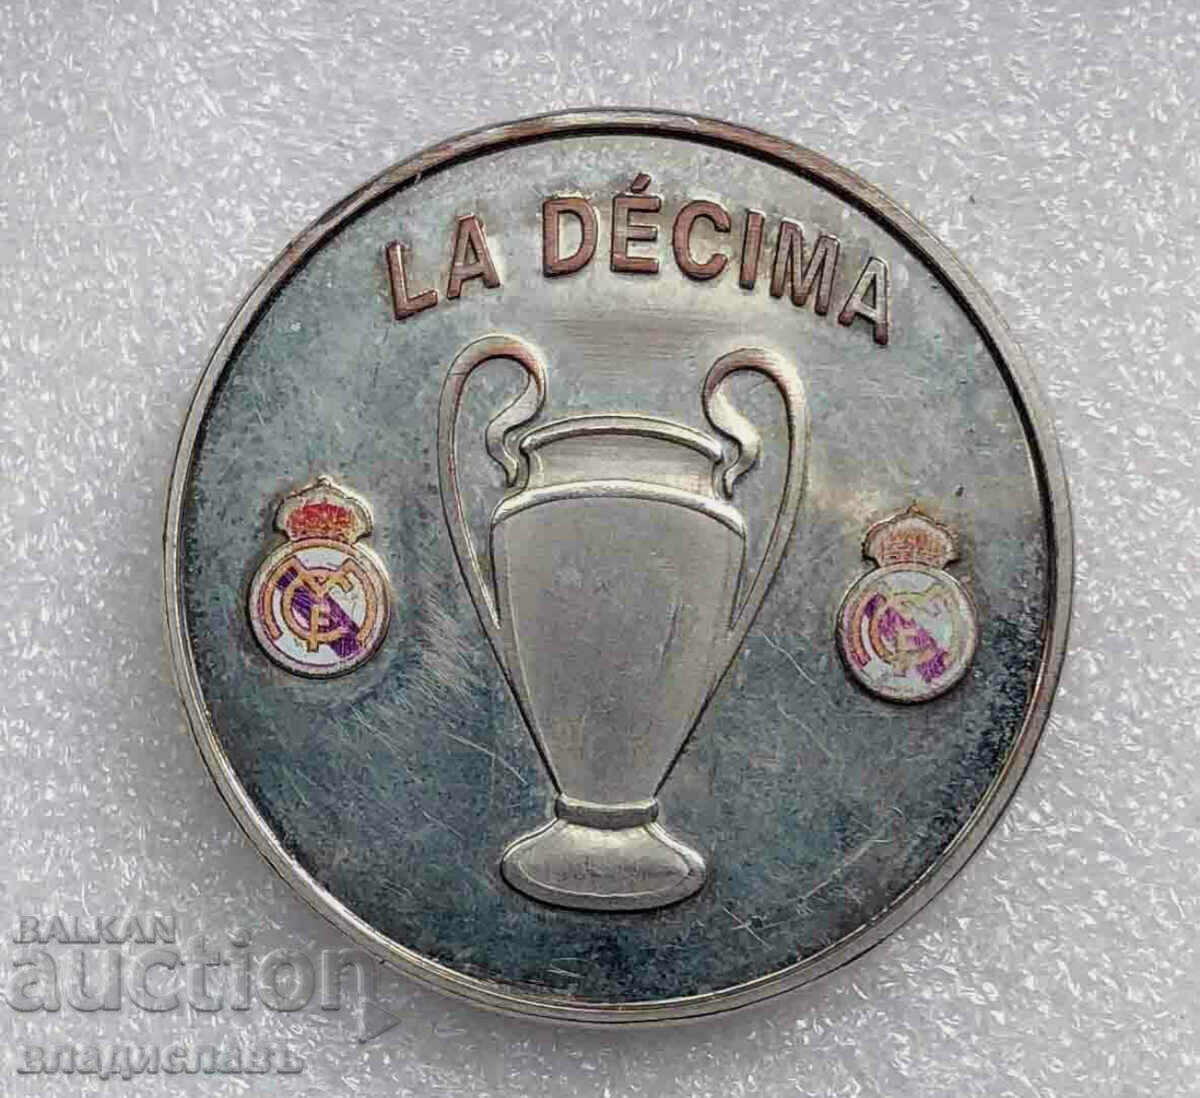 REAL MADRID - "Tenth" Champions League